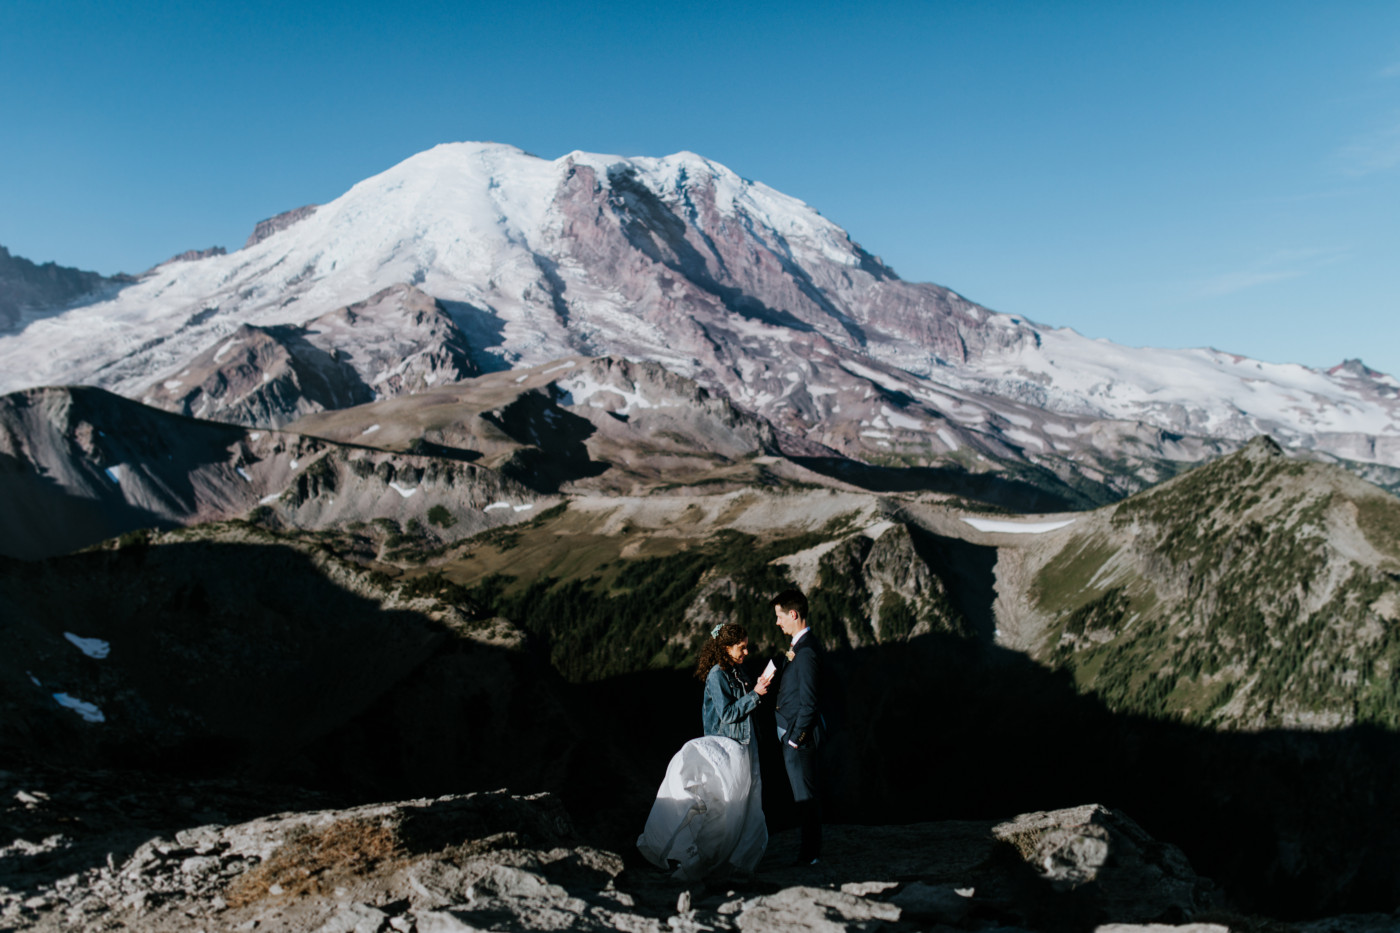 Tasha and chad at their eleopement spot with a view of the mountain. Elopement photography at Mount Rainier by Sienna Plus Josh.